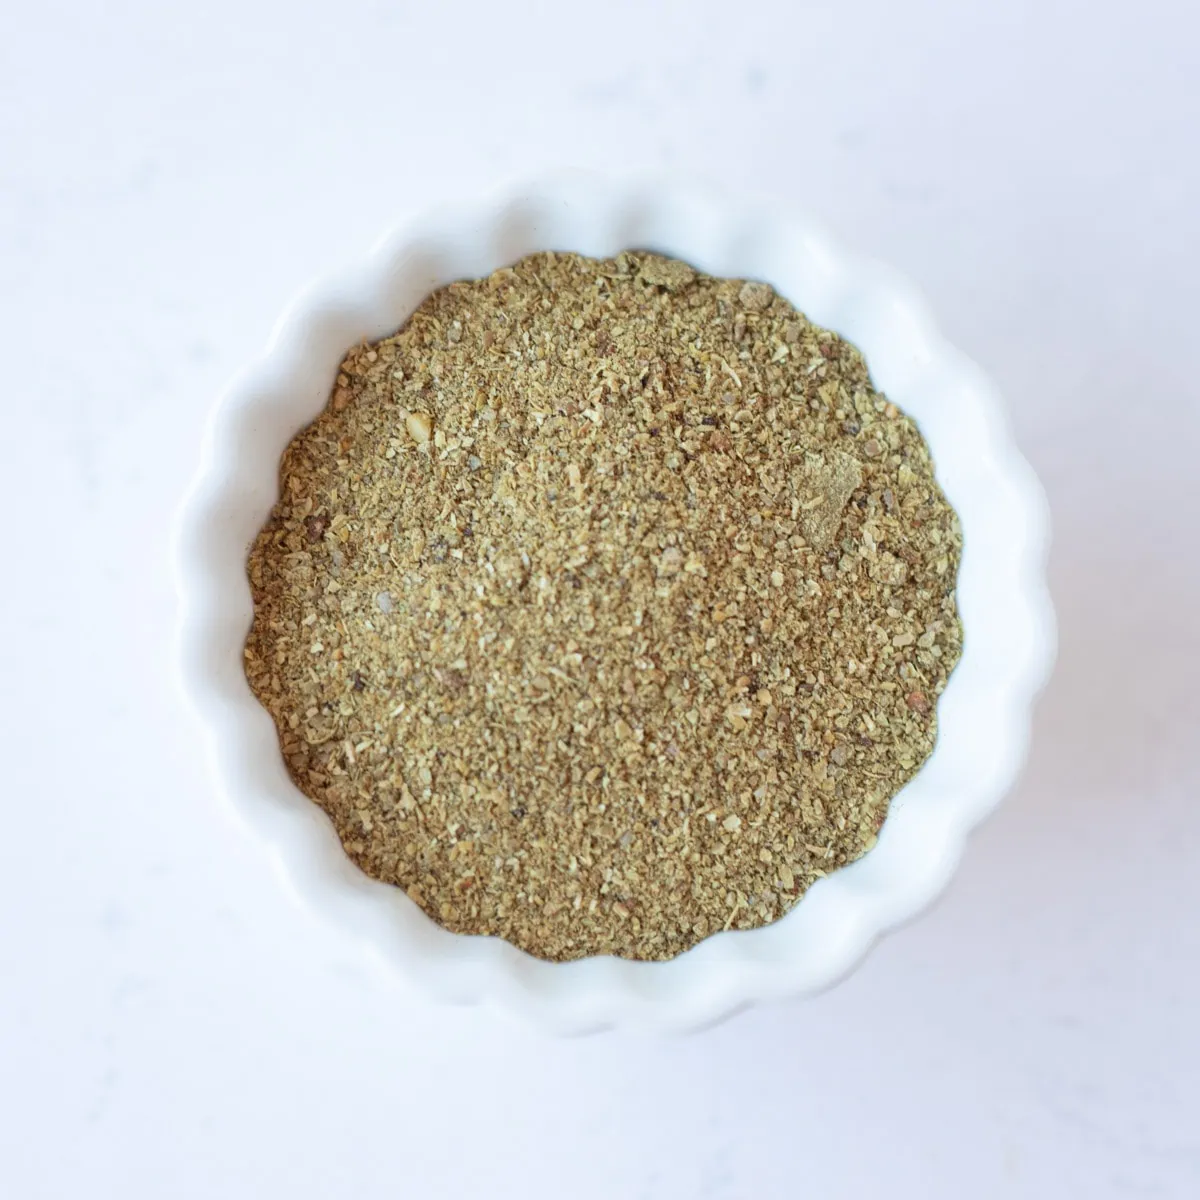 Corainder powder in a small white bowl.